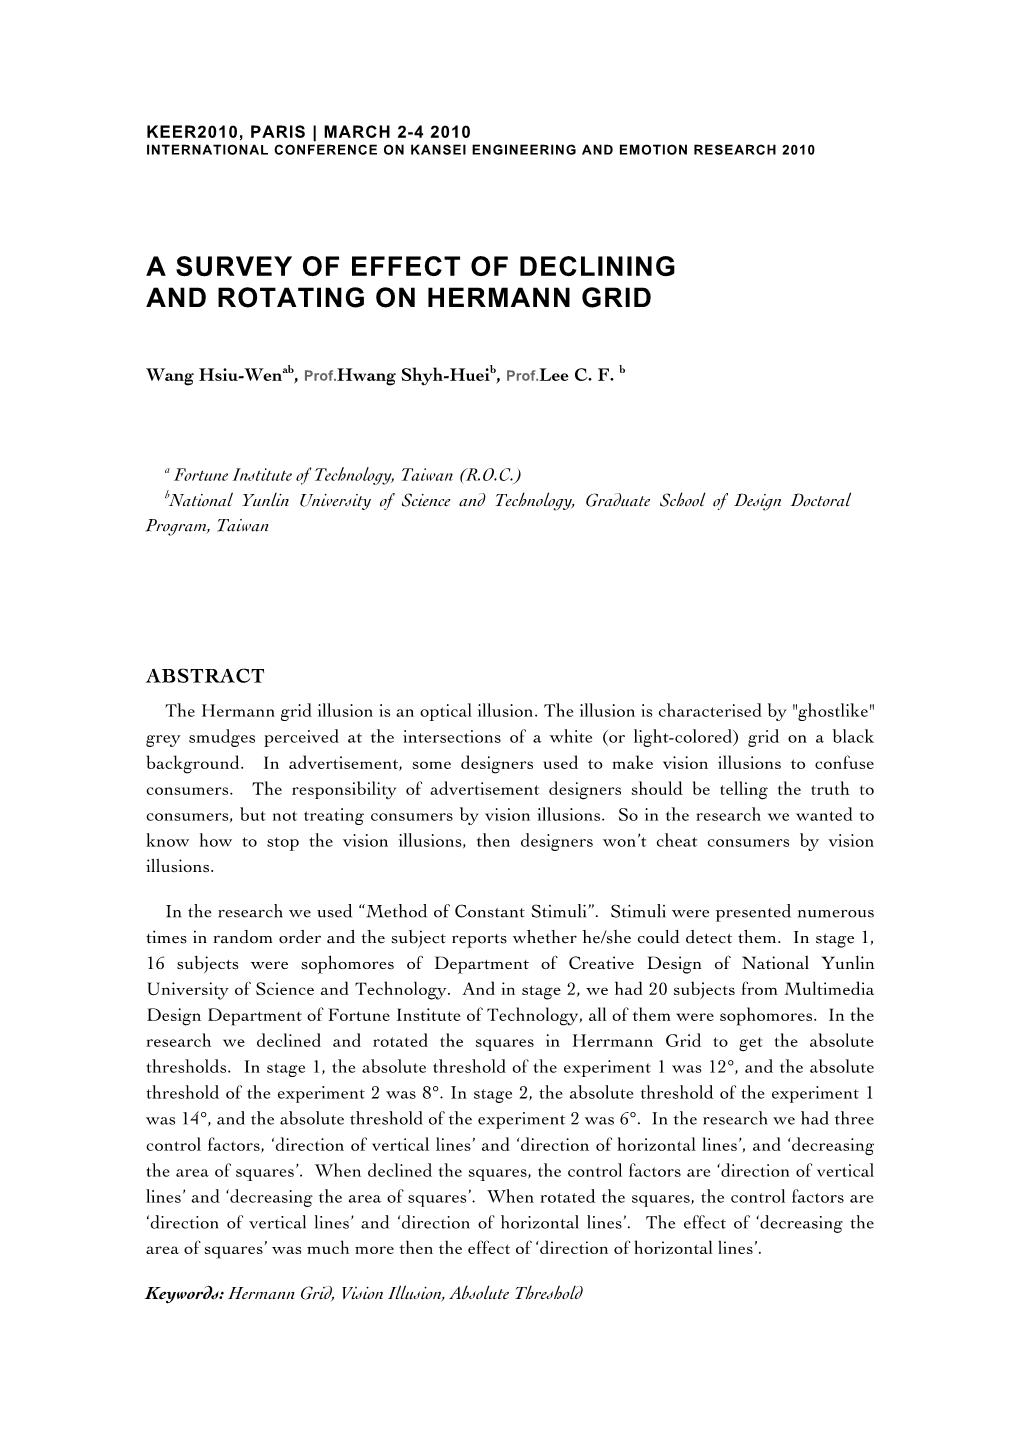 A Survey of Effect of Declining and Rotating on Hermann Grid